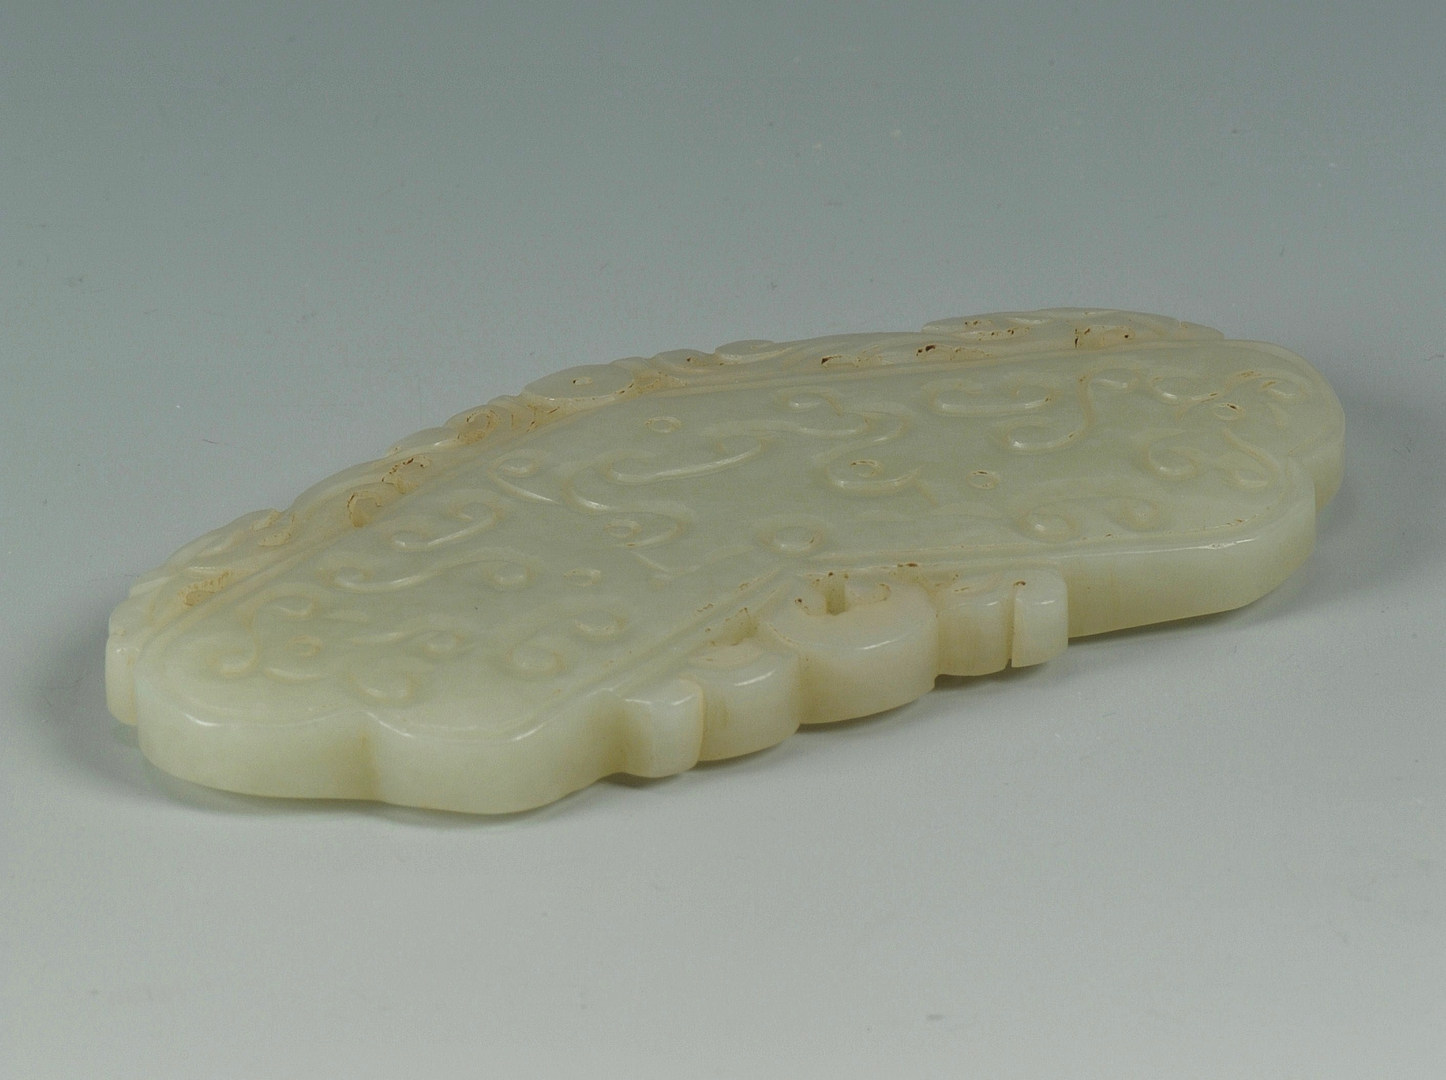 Lot 183: Chinese Carved Celadon Jade Plaque